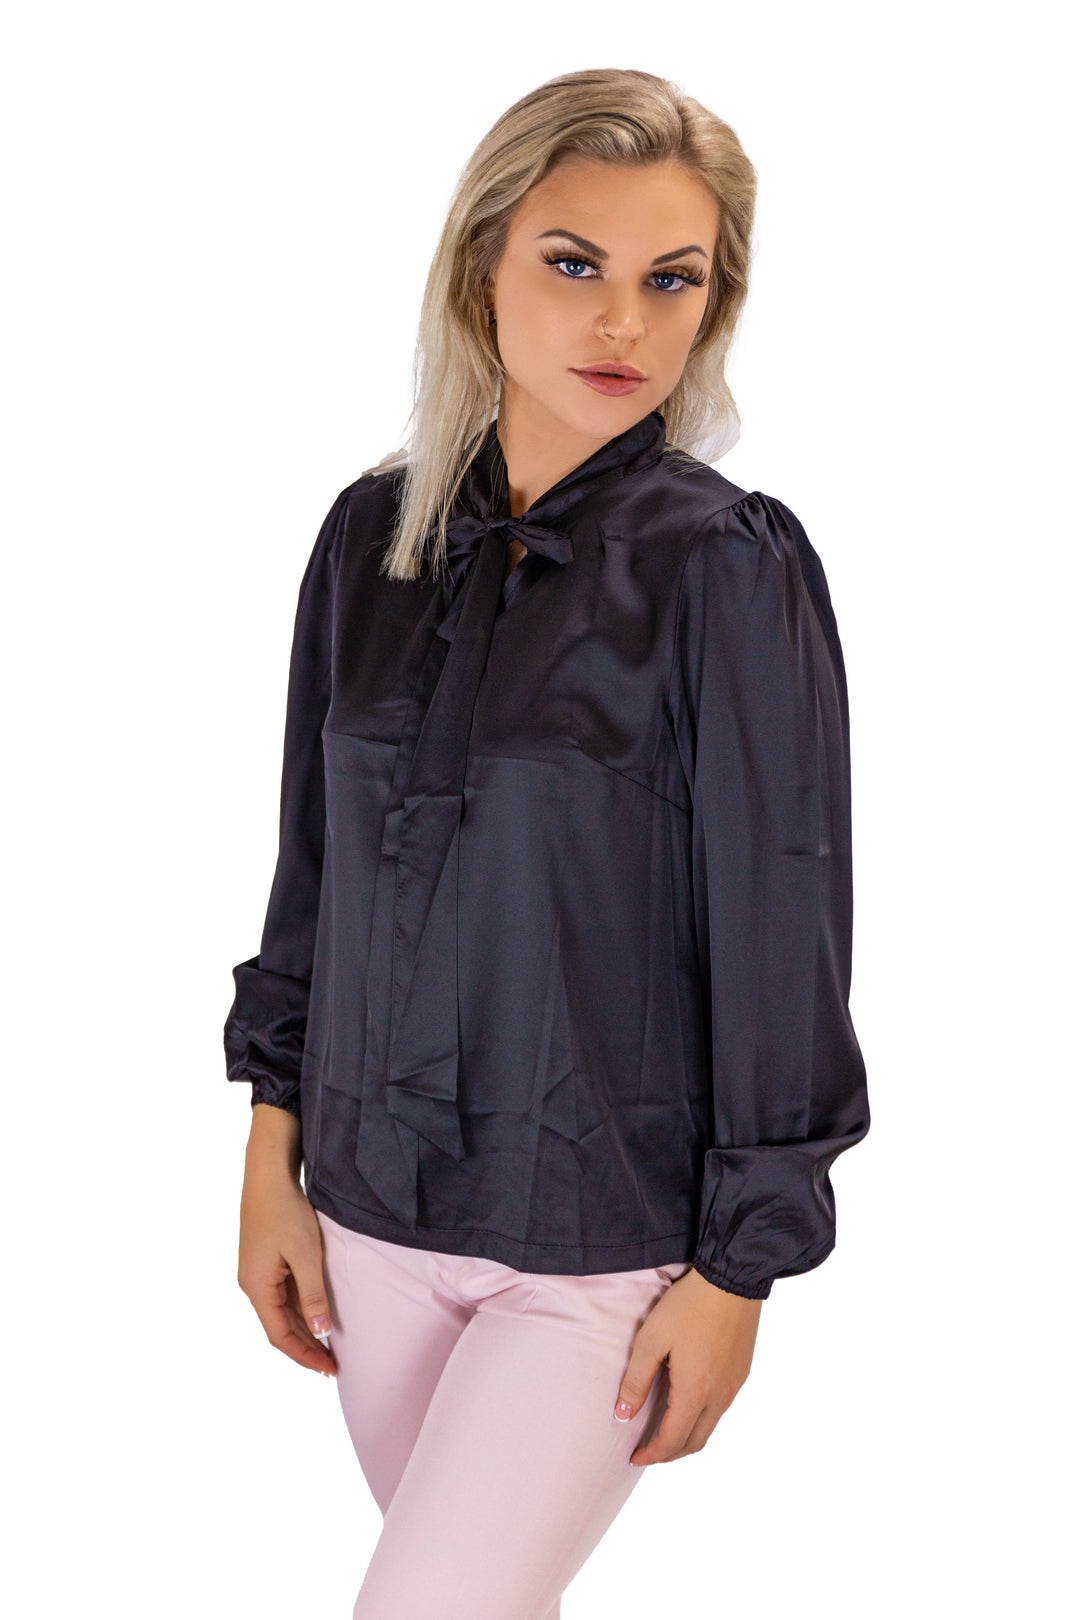 Fabonics Elegance Defined Black Casual Top with Bow Detail and Full Sleeves in Sophisticated Style